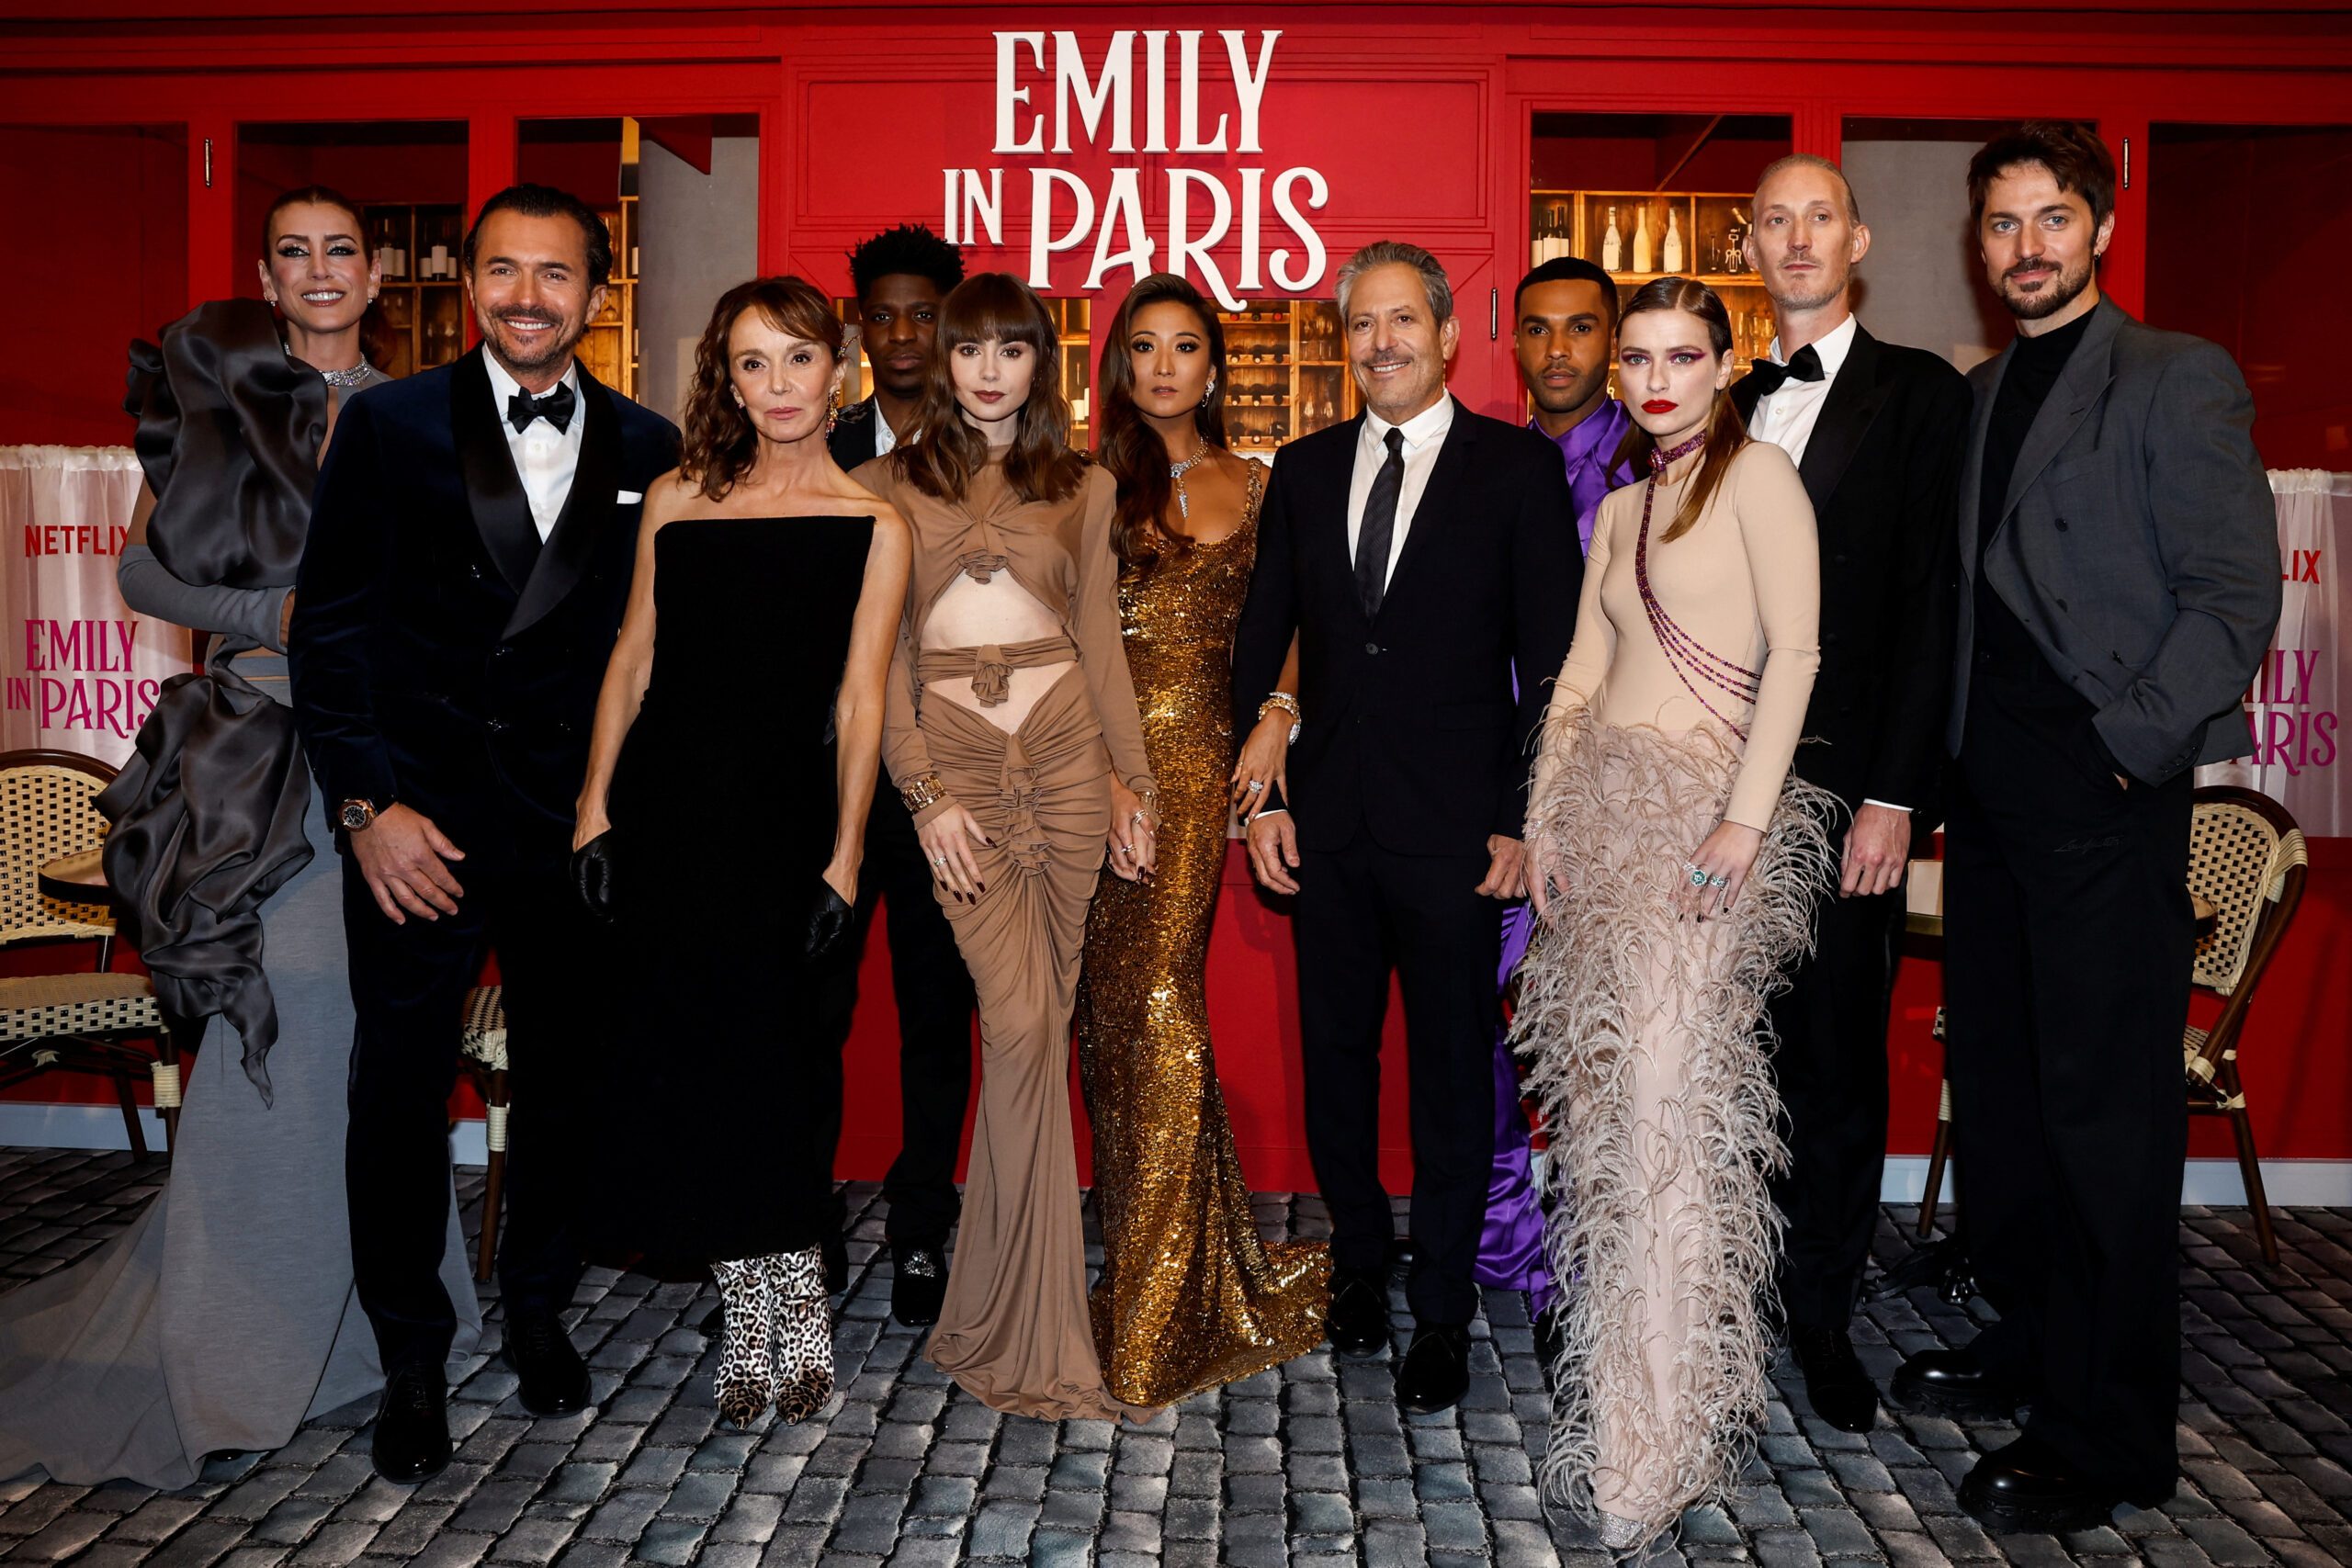 Emily in Paris' Season 3 Cast: Who Are Paul Forman and Melia Kreiling?